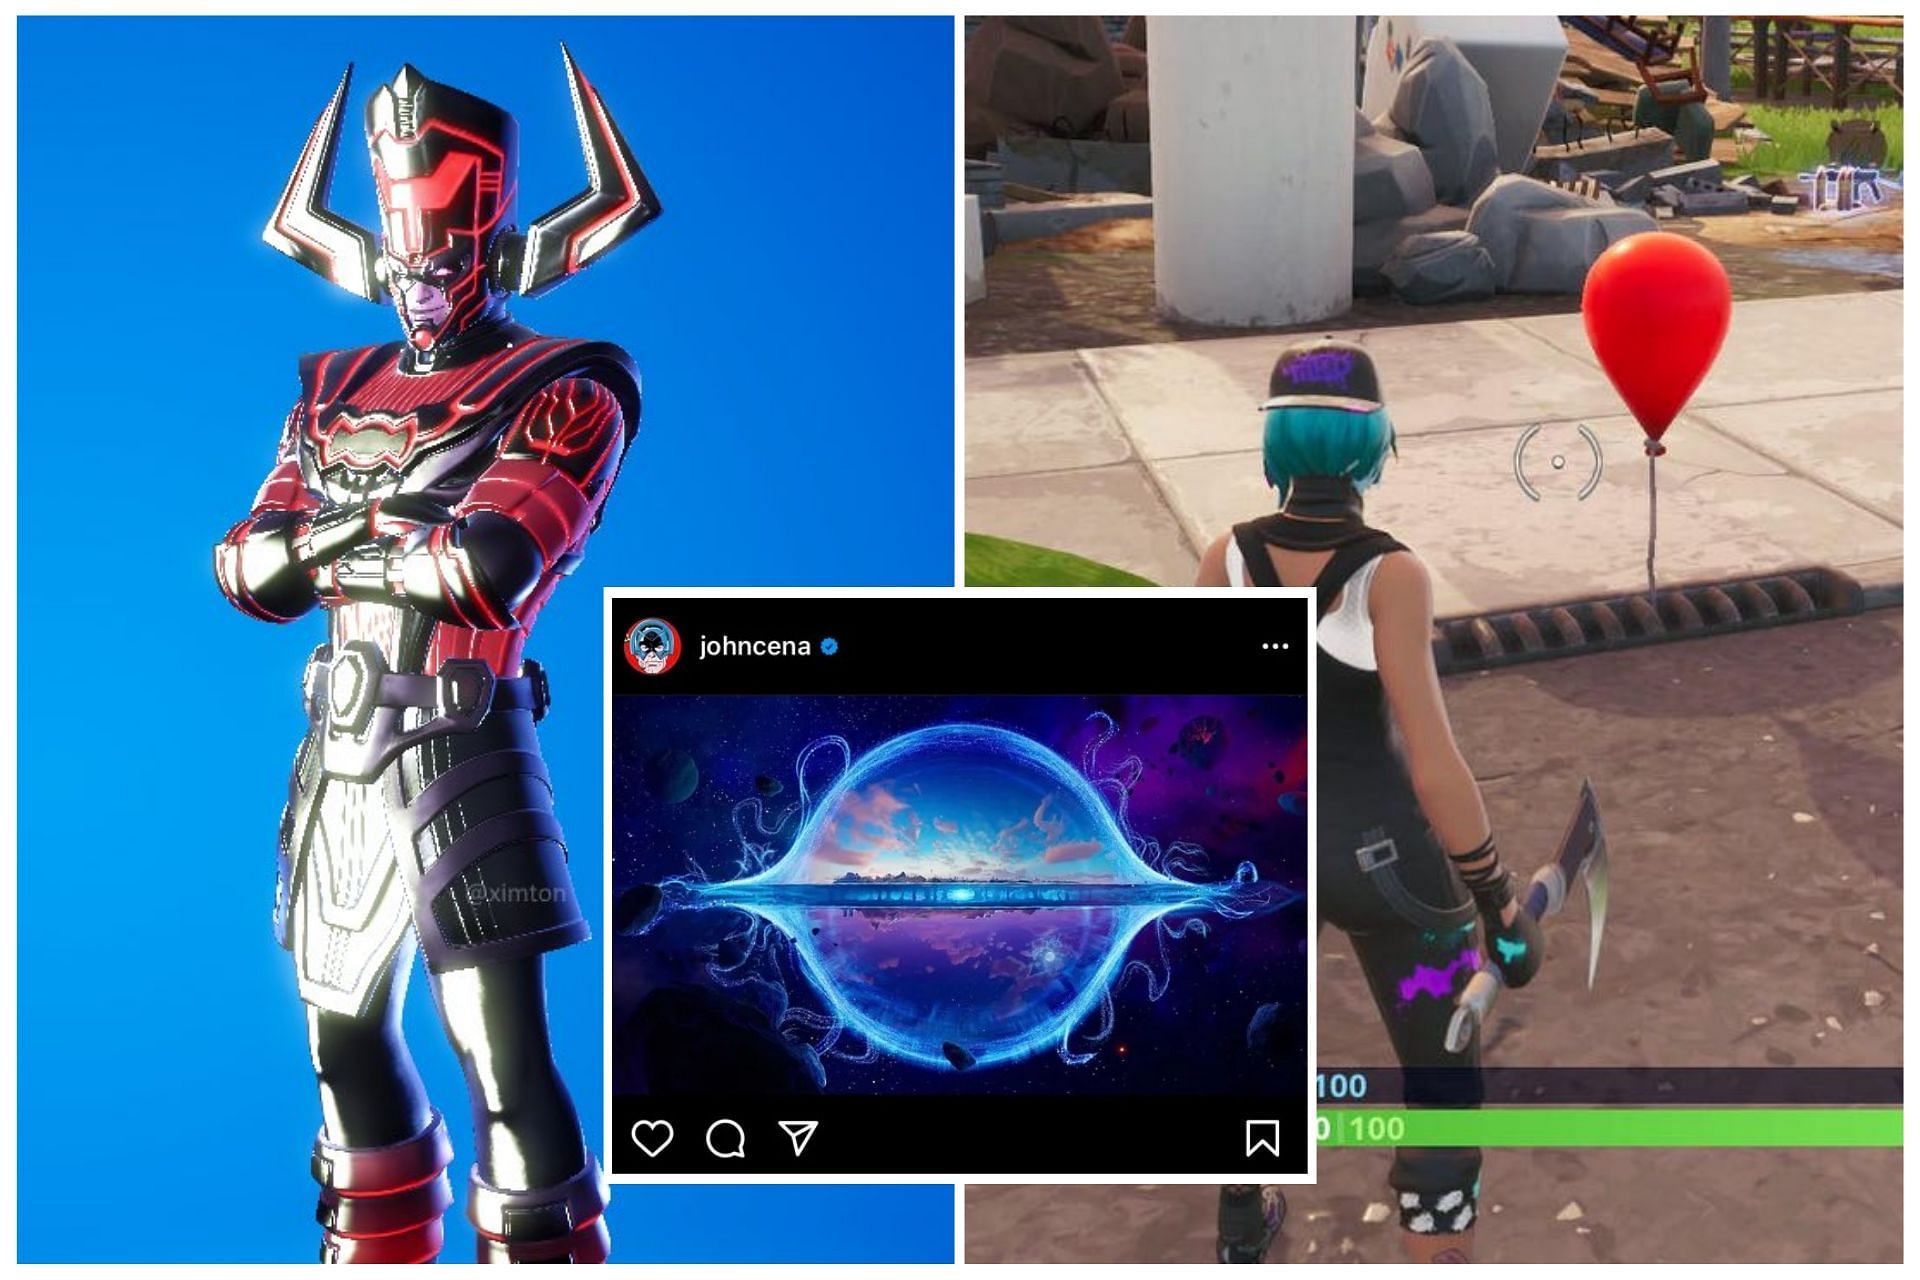 Fortnite teased skins for Galactus, Peacemaker, and Pennyvise but never released them (Image via Sportskeeda)